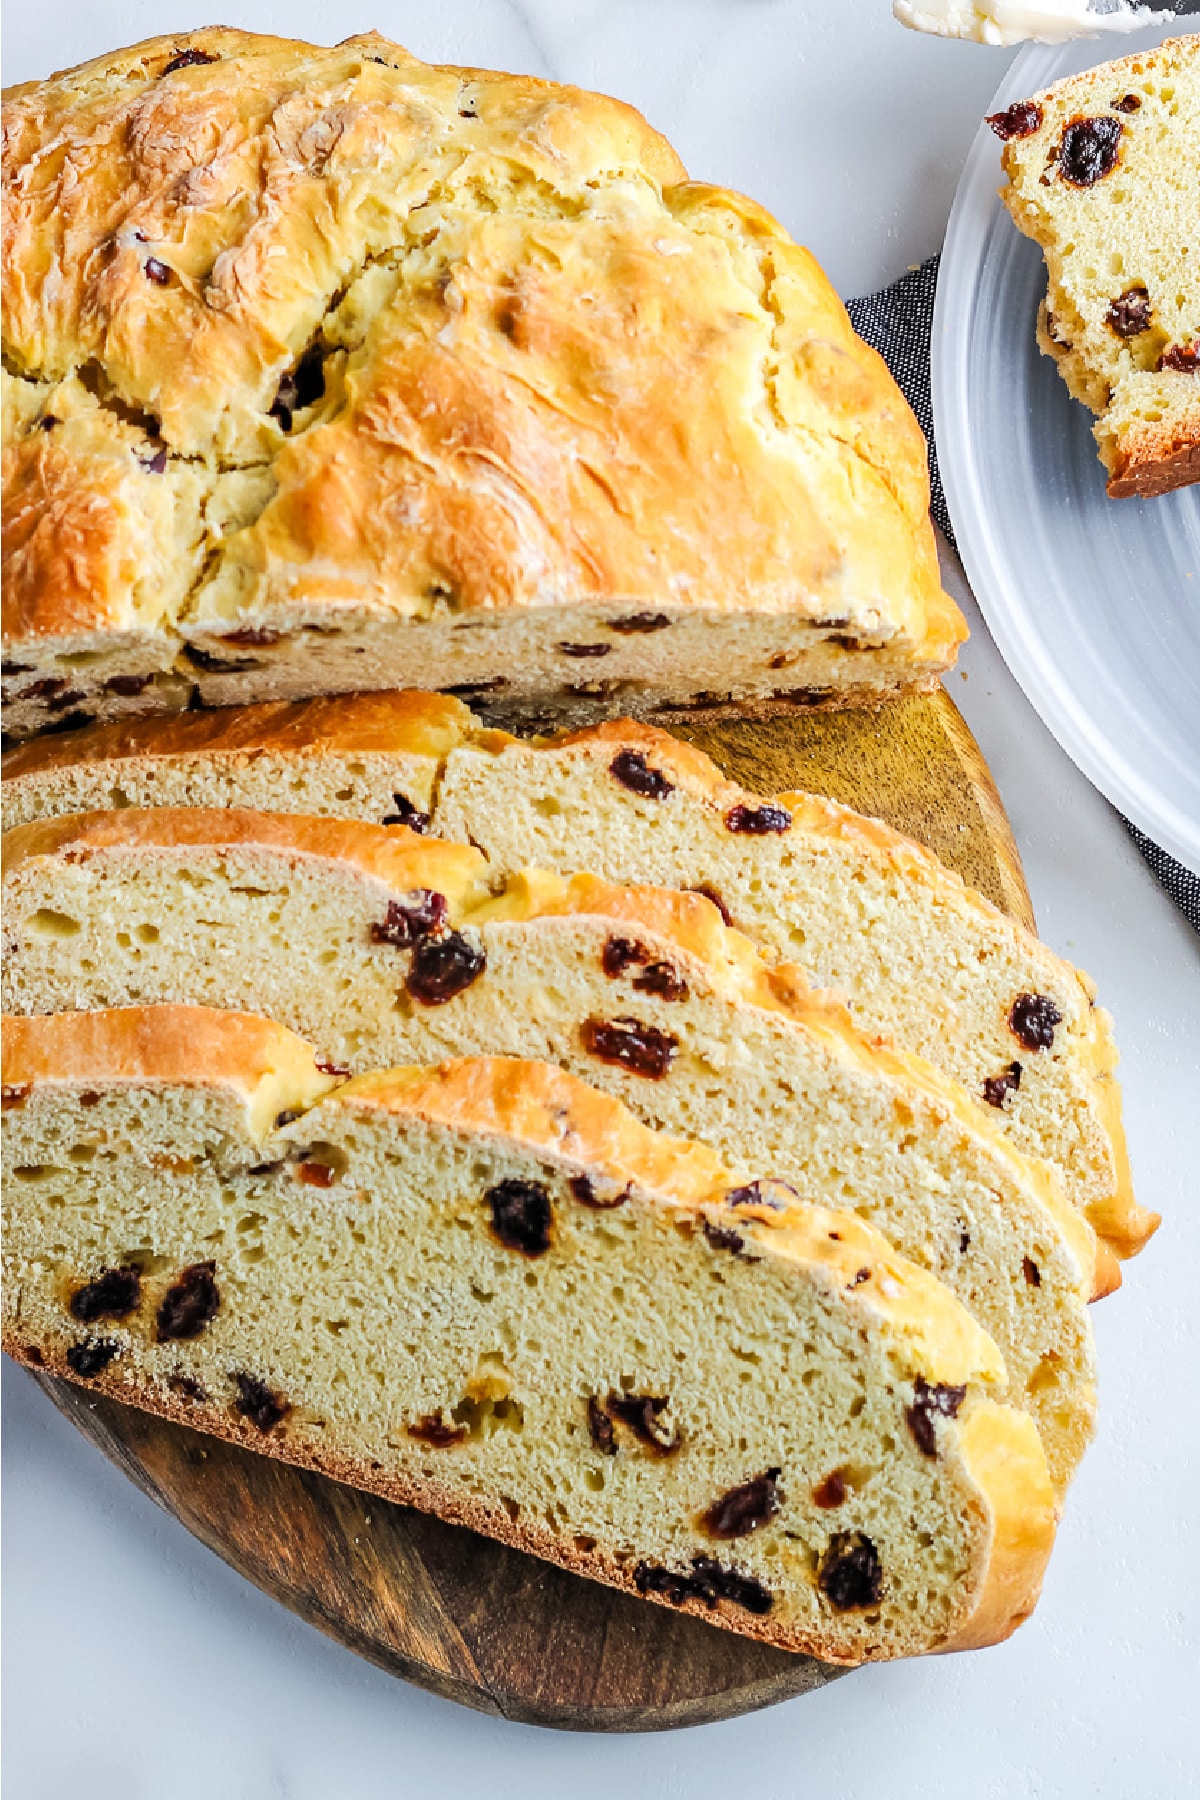 A loaf of Irish soda bread with raisins with three pieces of bread sliced to serve.